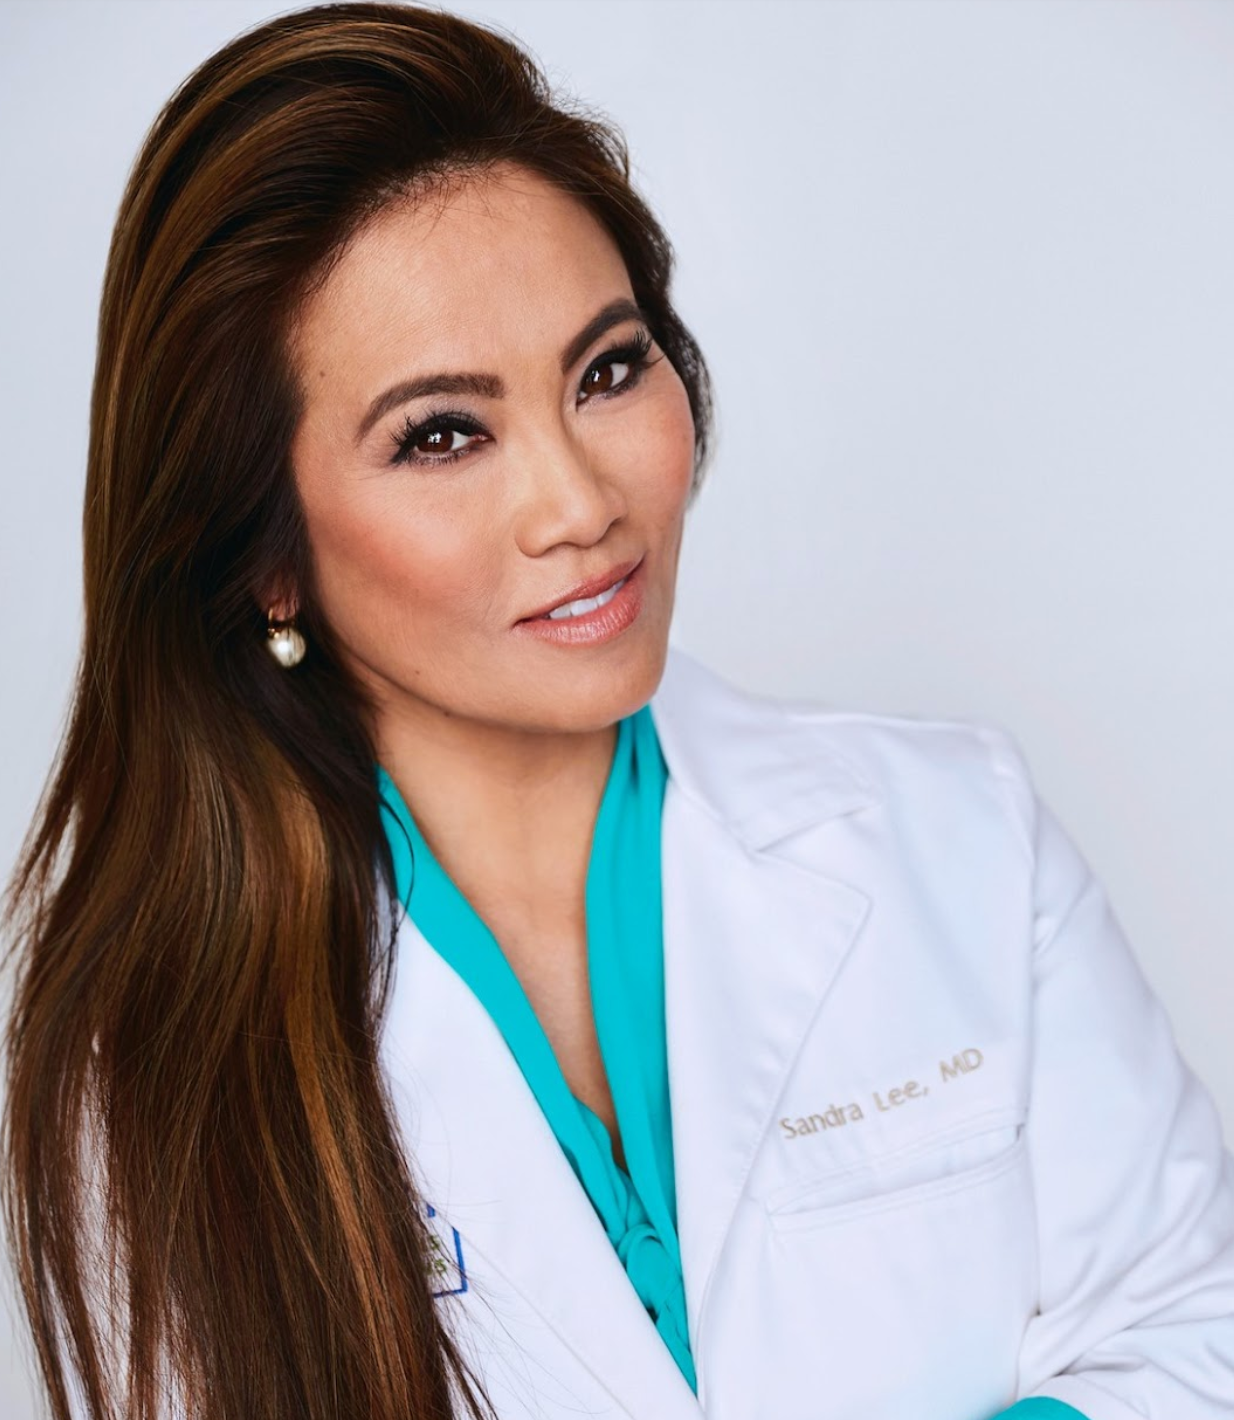 How Dr. Sandra Lee, Dr. Pimple Popper, Thrives As an Entrepreneur Turned  Celebrity | by Ming S. Zhao | Authority Magazine | Medium